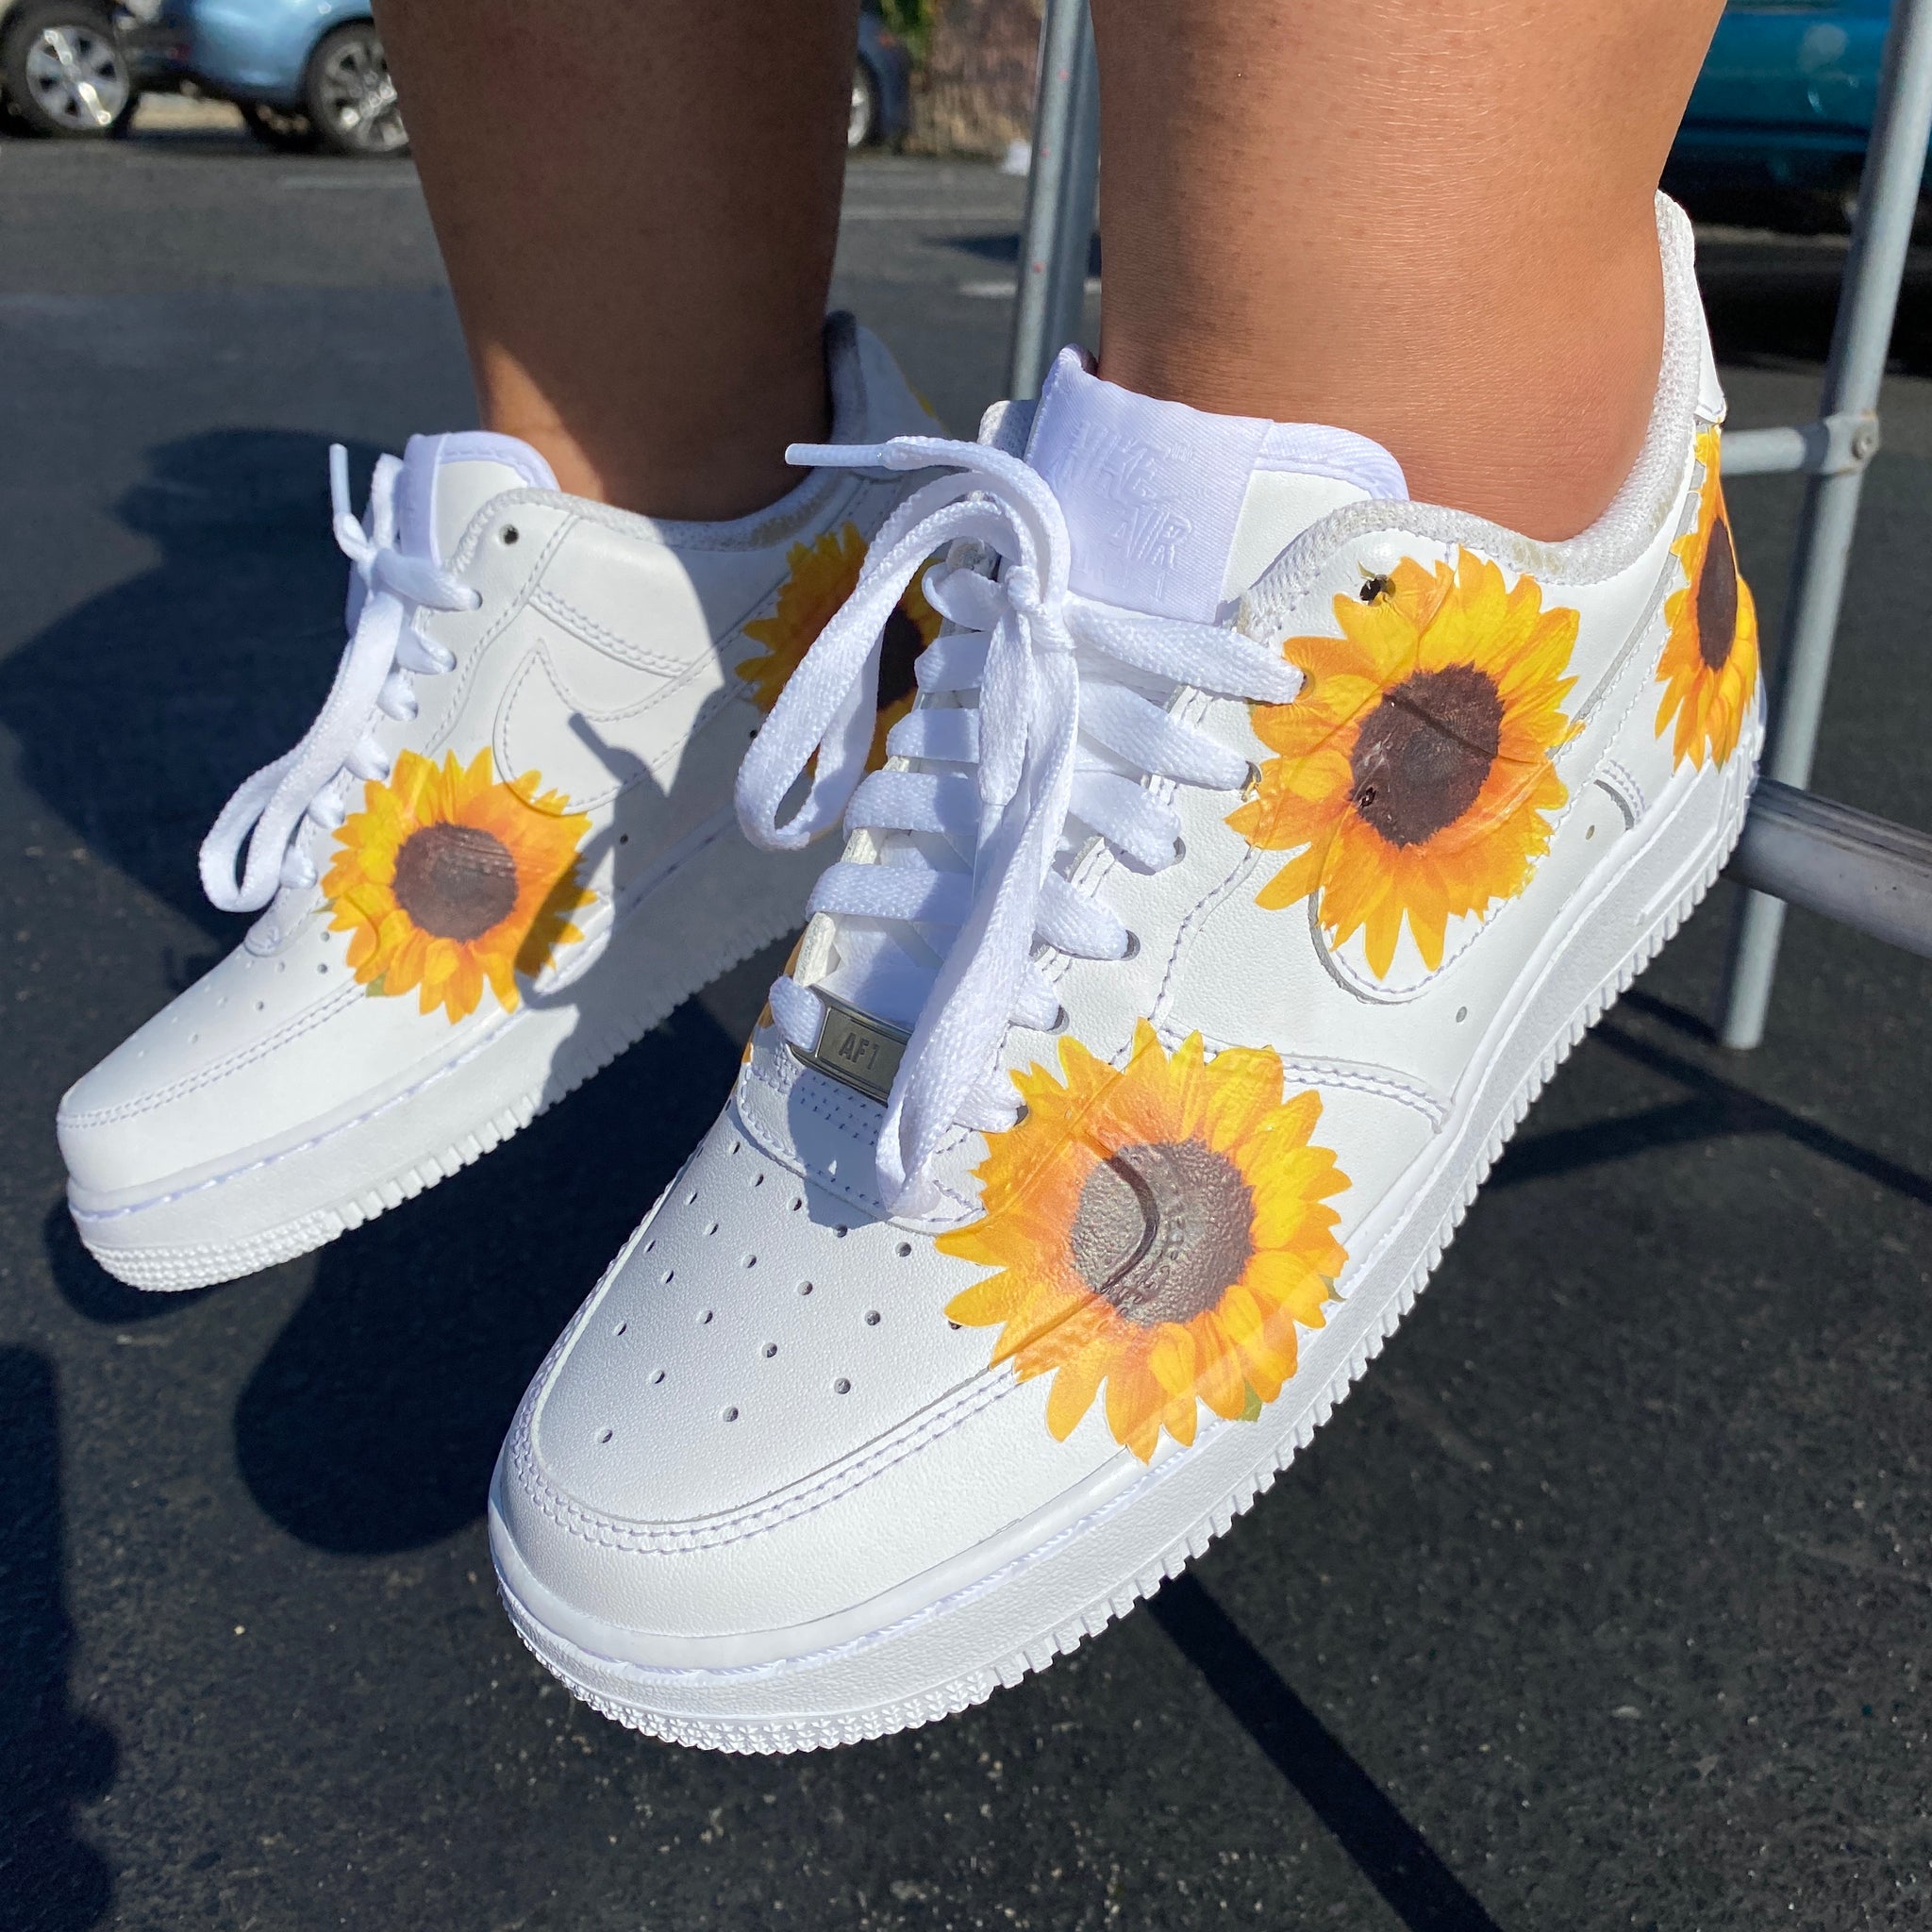 black nikes with sunflower design